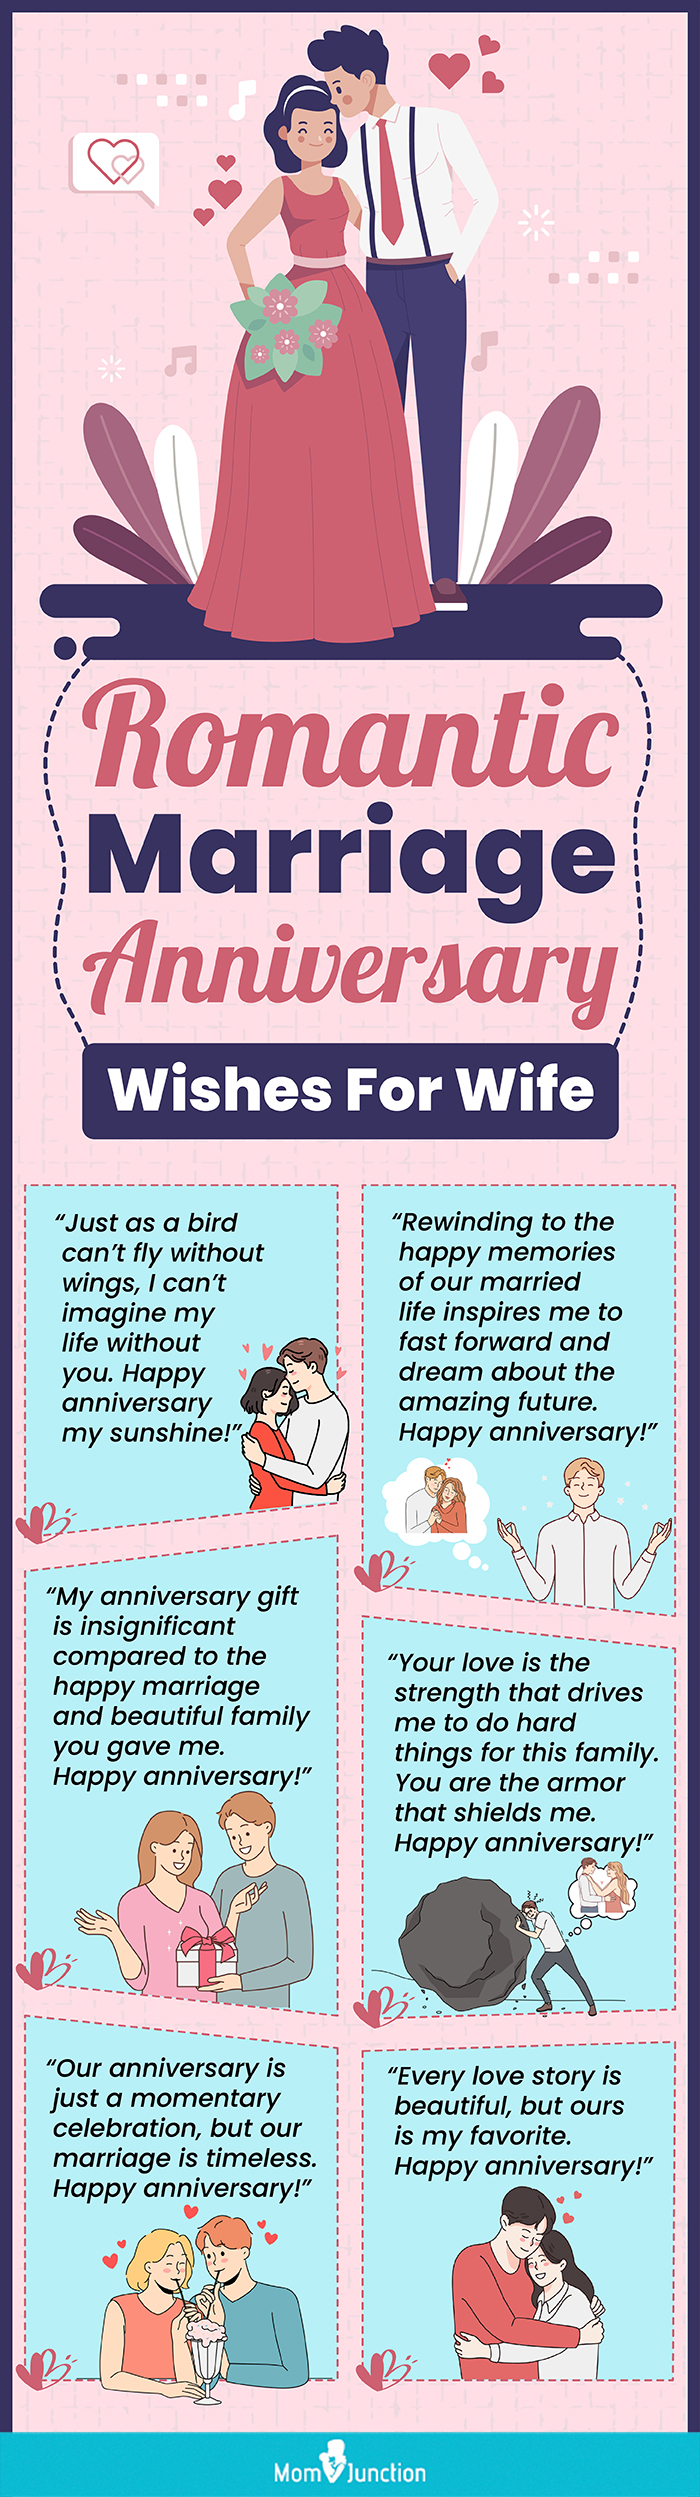 Gifts for Wife, Her, Fiance, Wedding Anniversary Gifts for Wife, Mothe